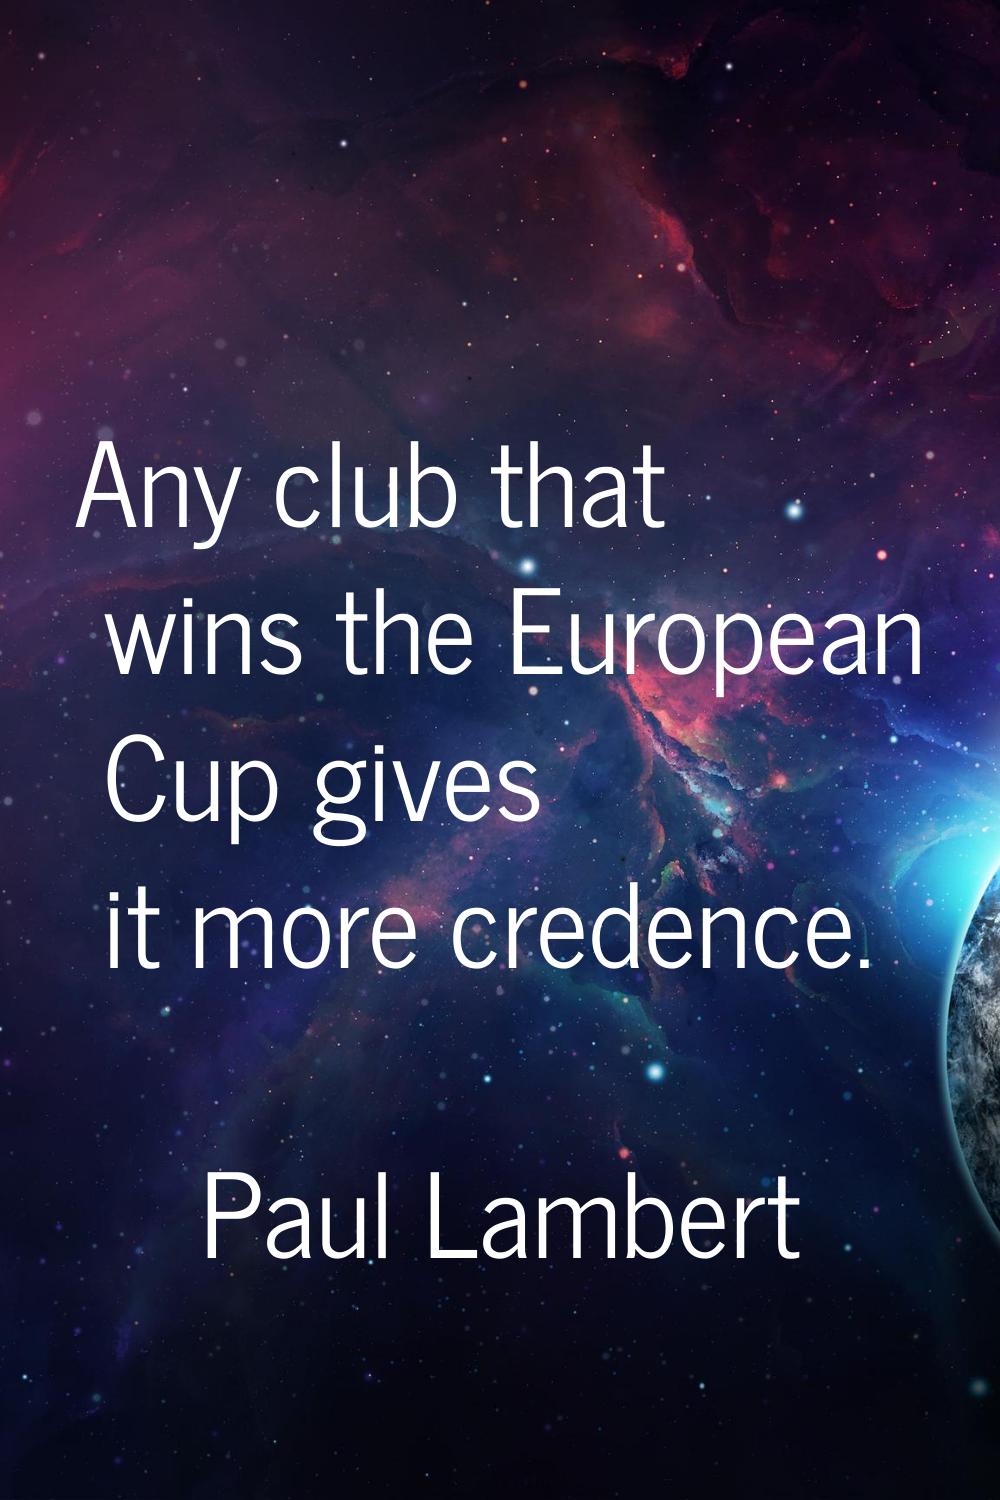 Any club that wins the European Cup gives it more credence.